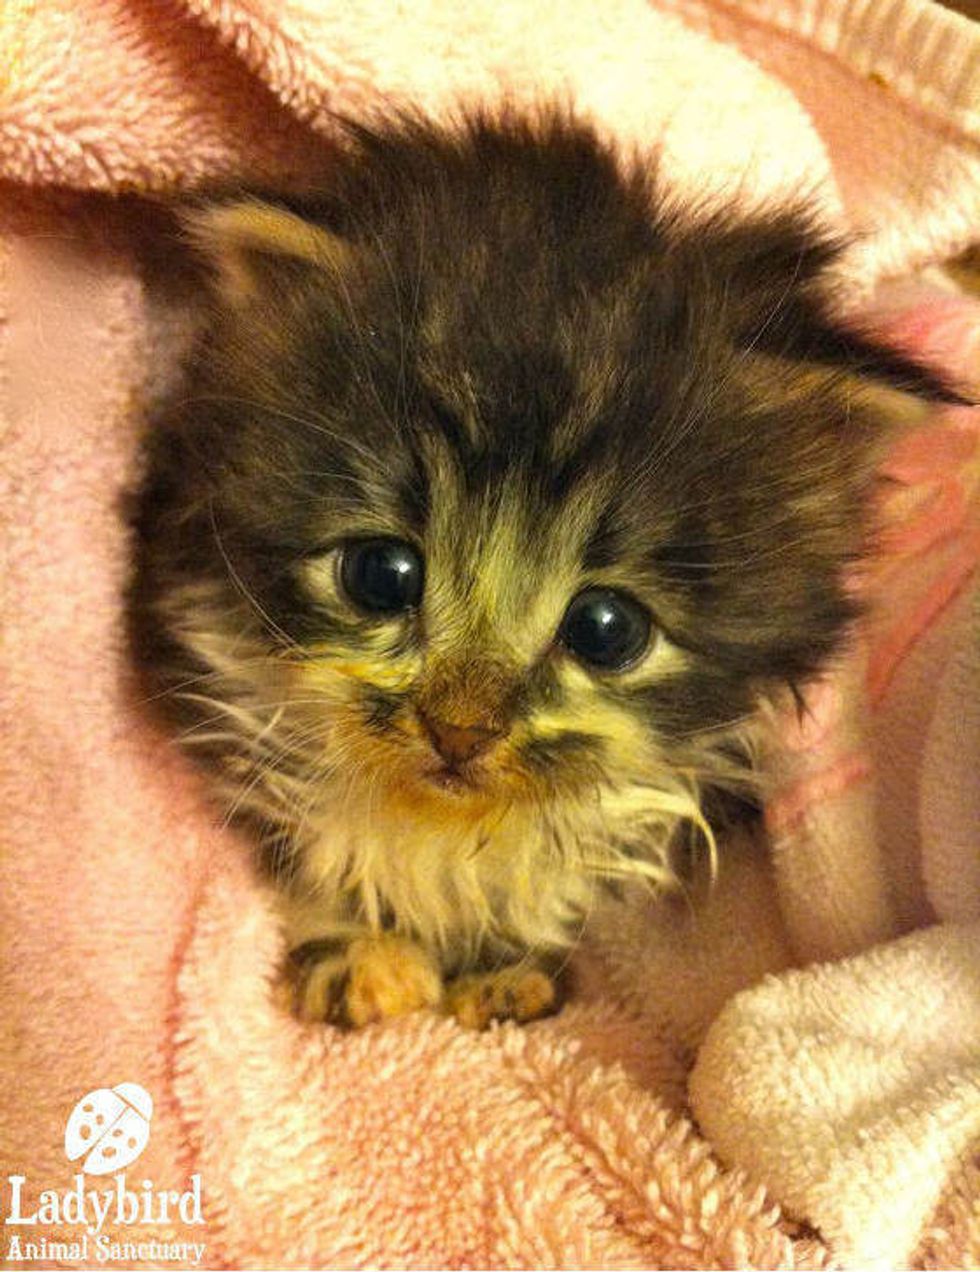 Little Bean the 3-week-old Orphan Kitten Strays into New Life